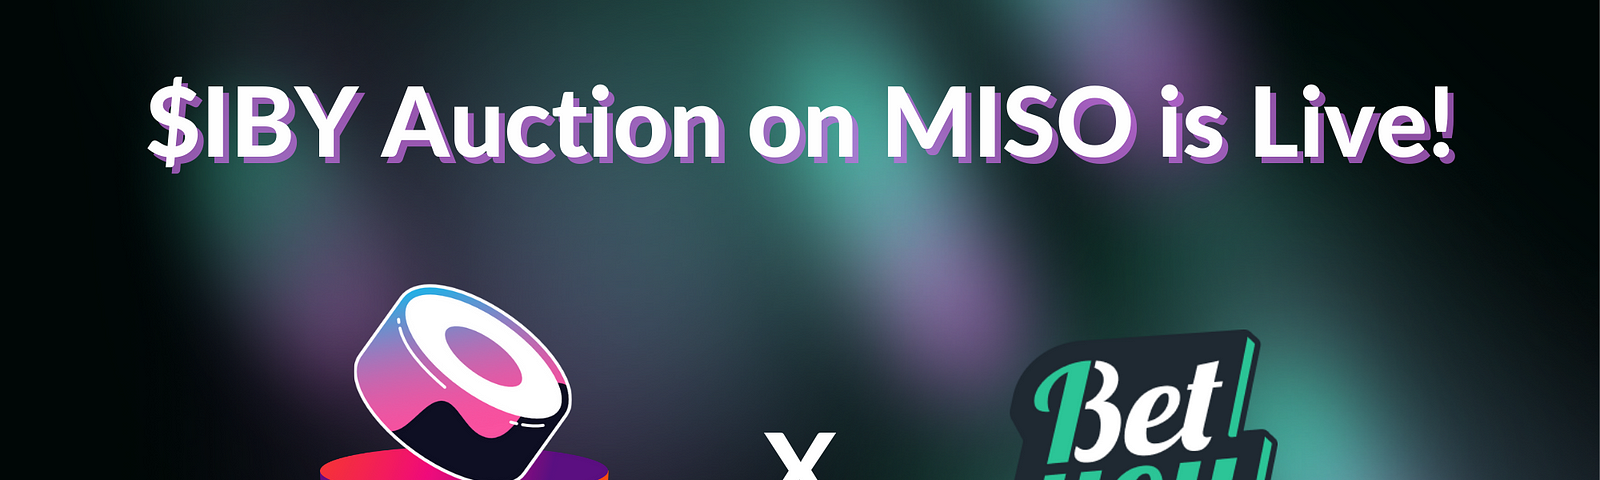 $IBY auction on MISO is live!